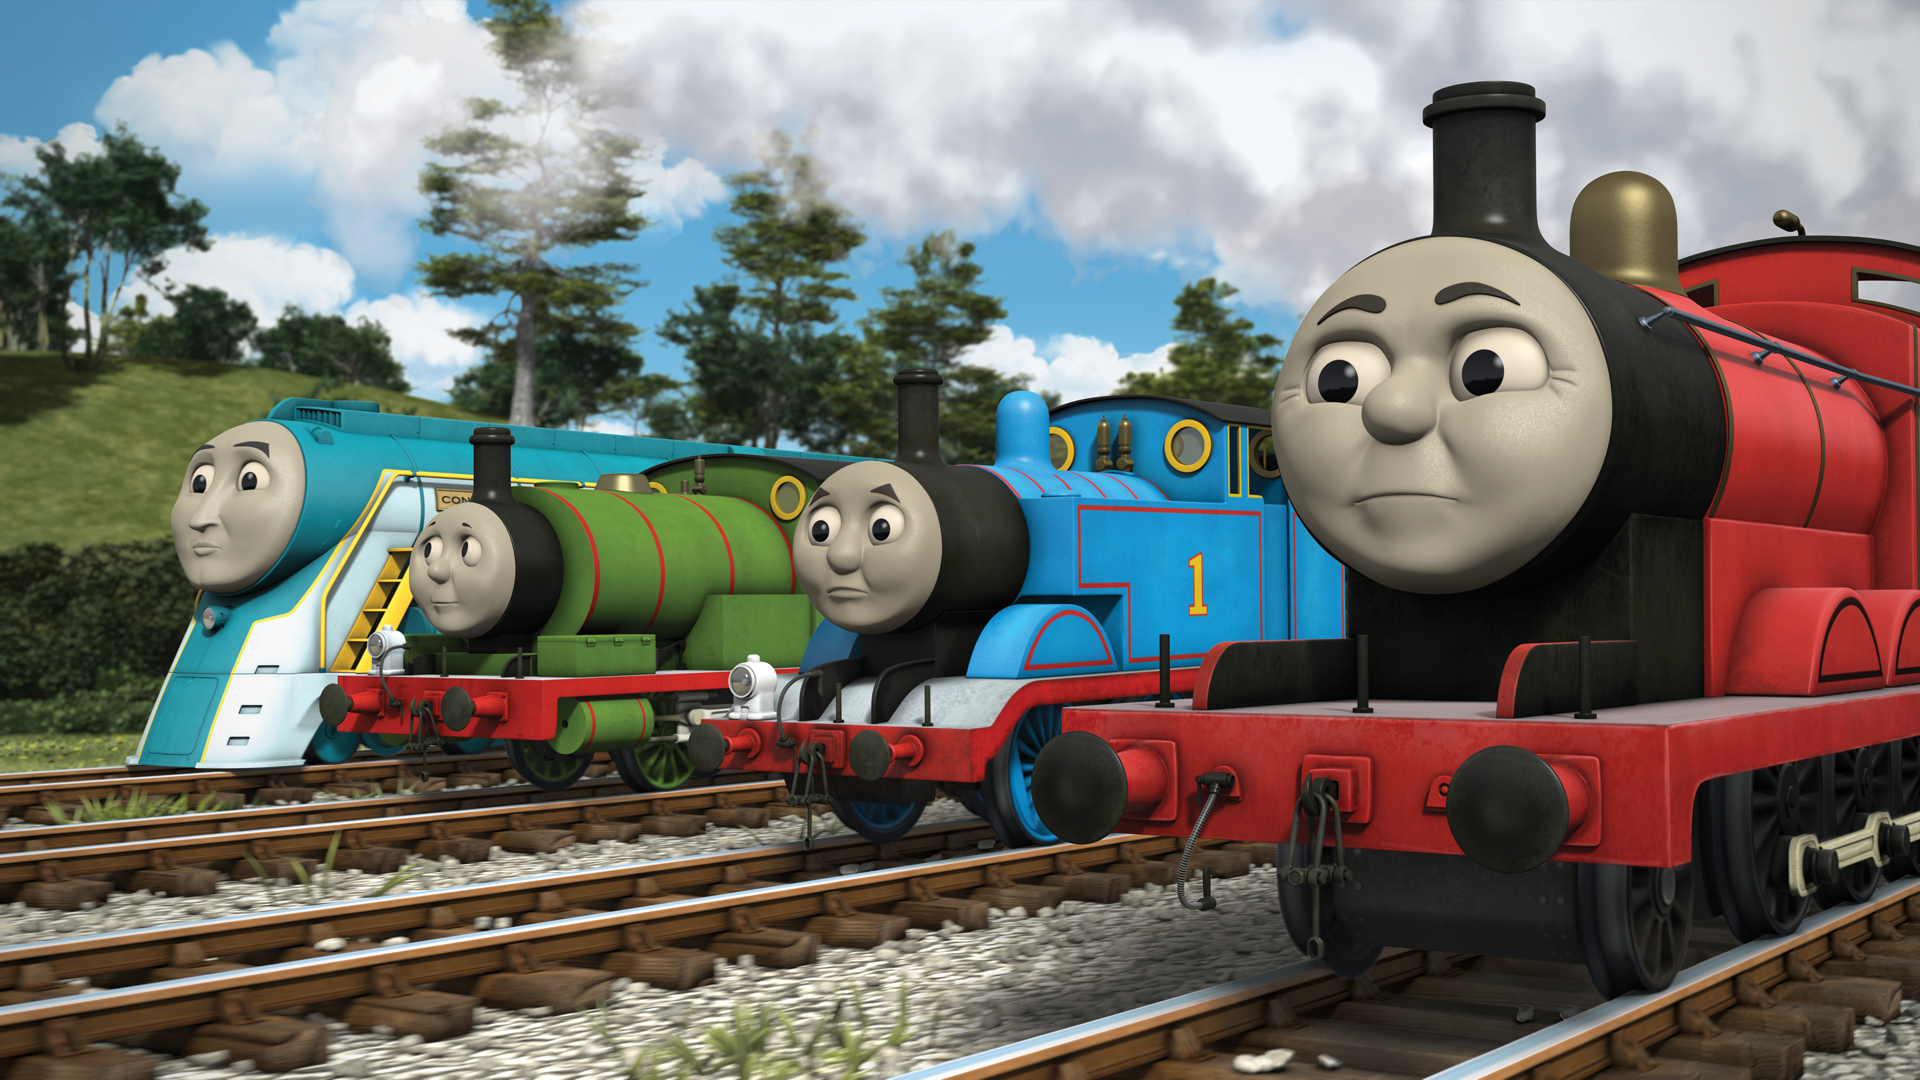 Wallpapers Thomas And Friends Hd For 1920x1080 #thomas